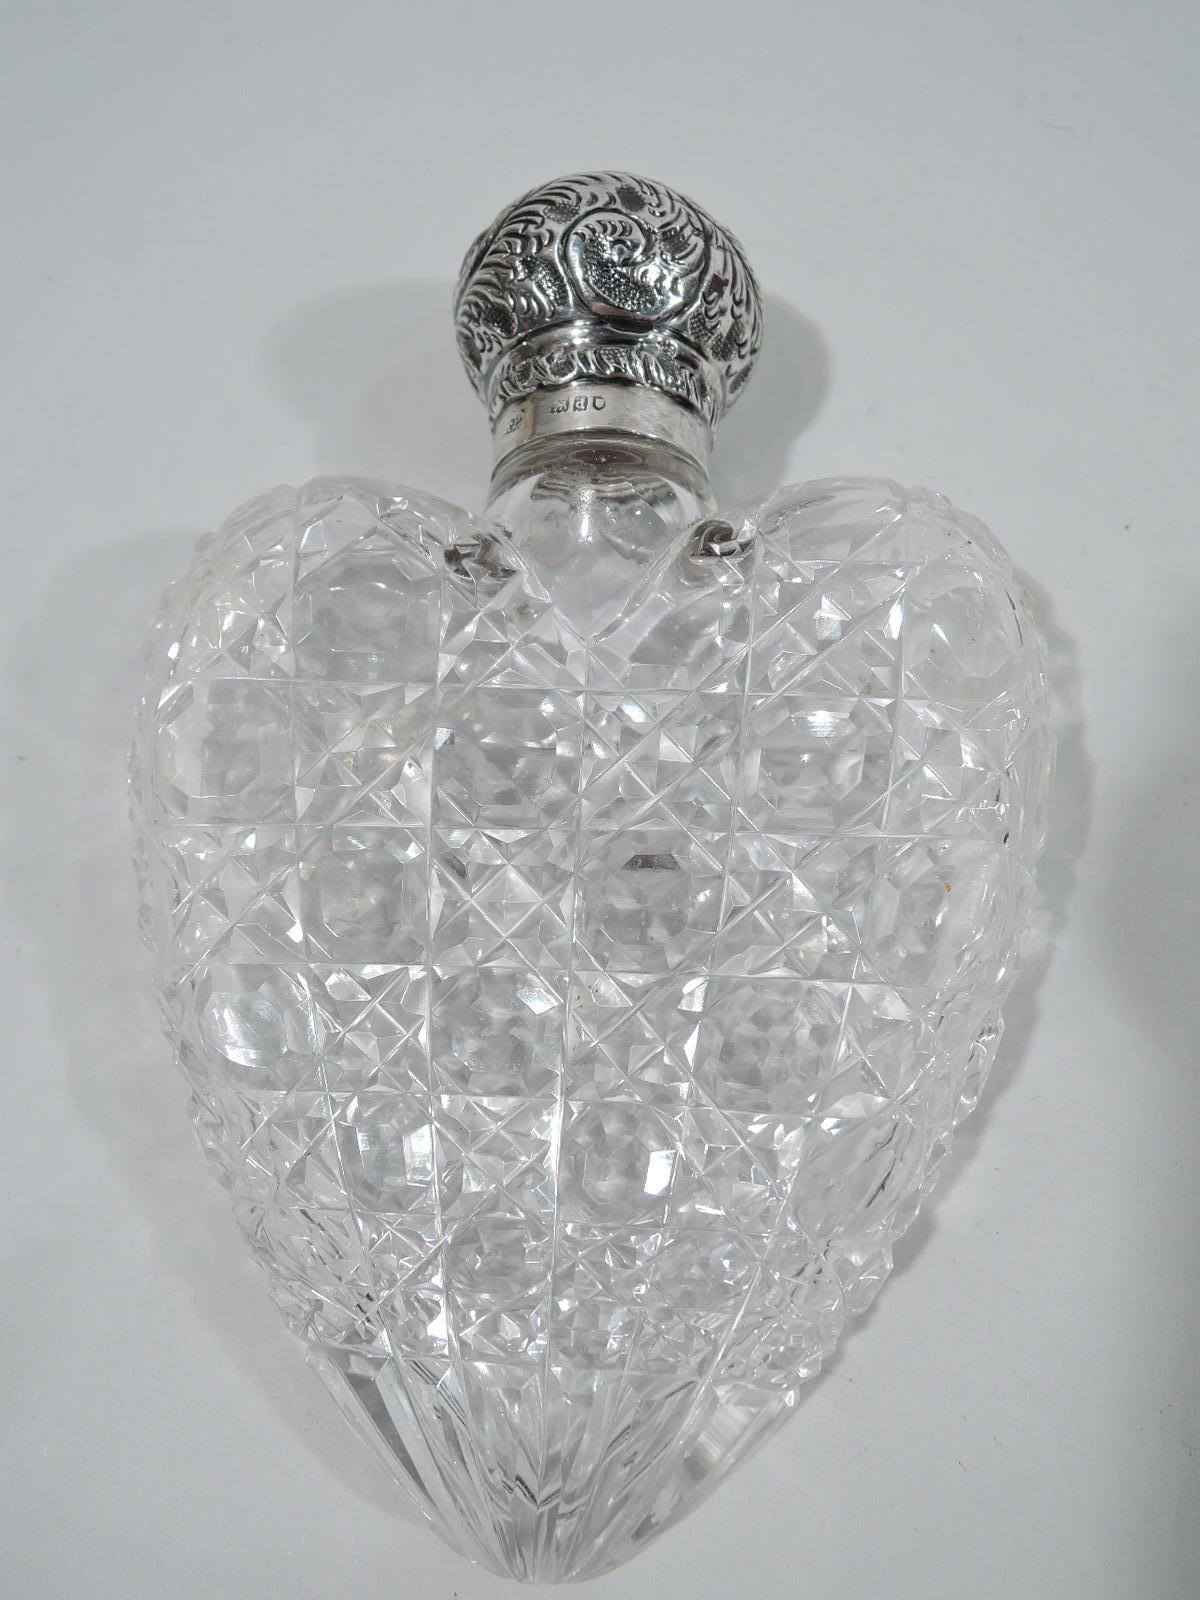 Victorian cut-glass flask with sterling silver cover. Made by Robert Pringle & Sons in London in 1899. Heart-form with flat sides and diaper pattern. Ball cover threaded and cork-lined with tooled leafing scrolls and vacant top. A lady's medicinal